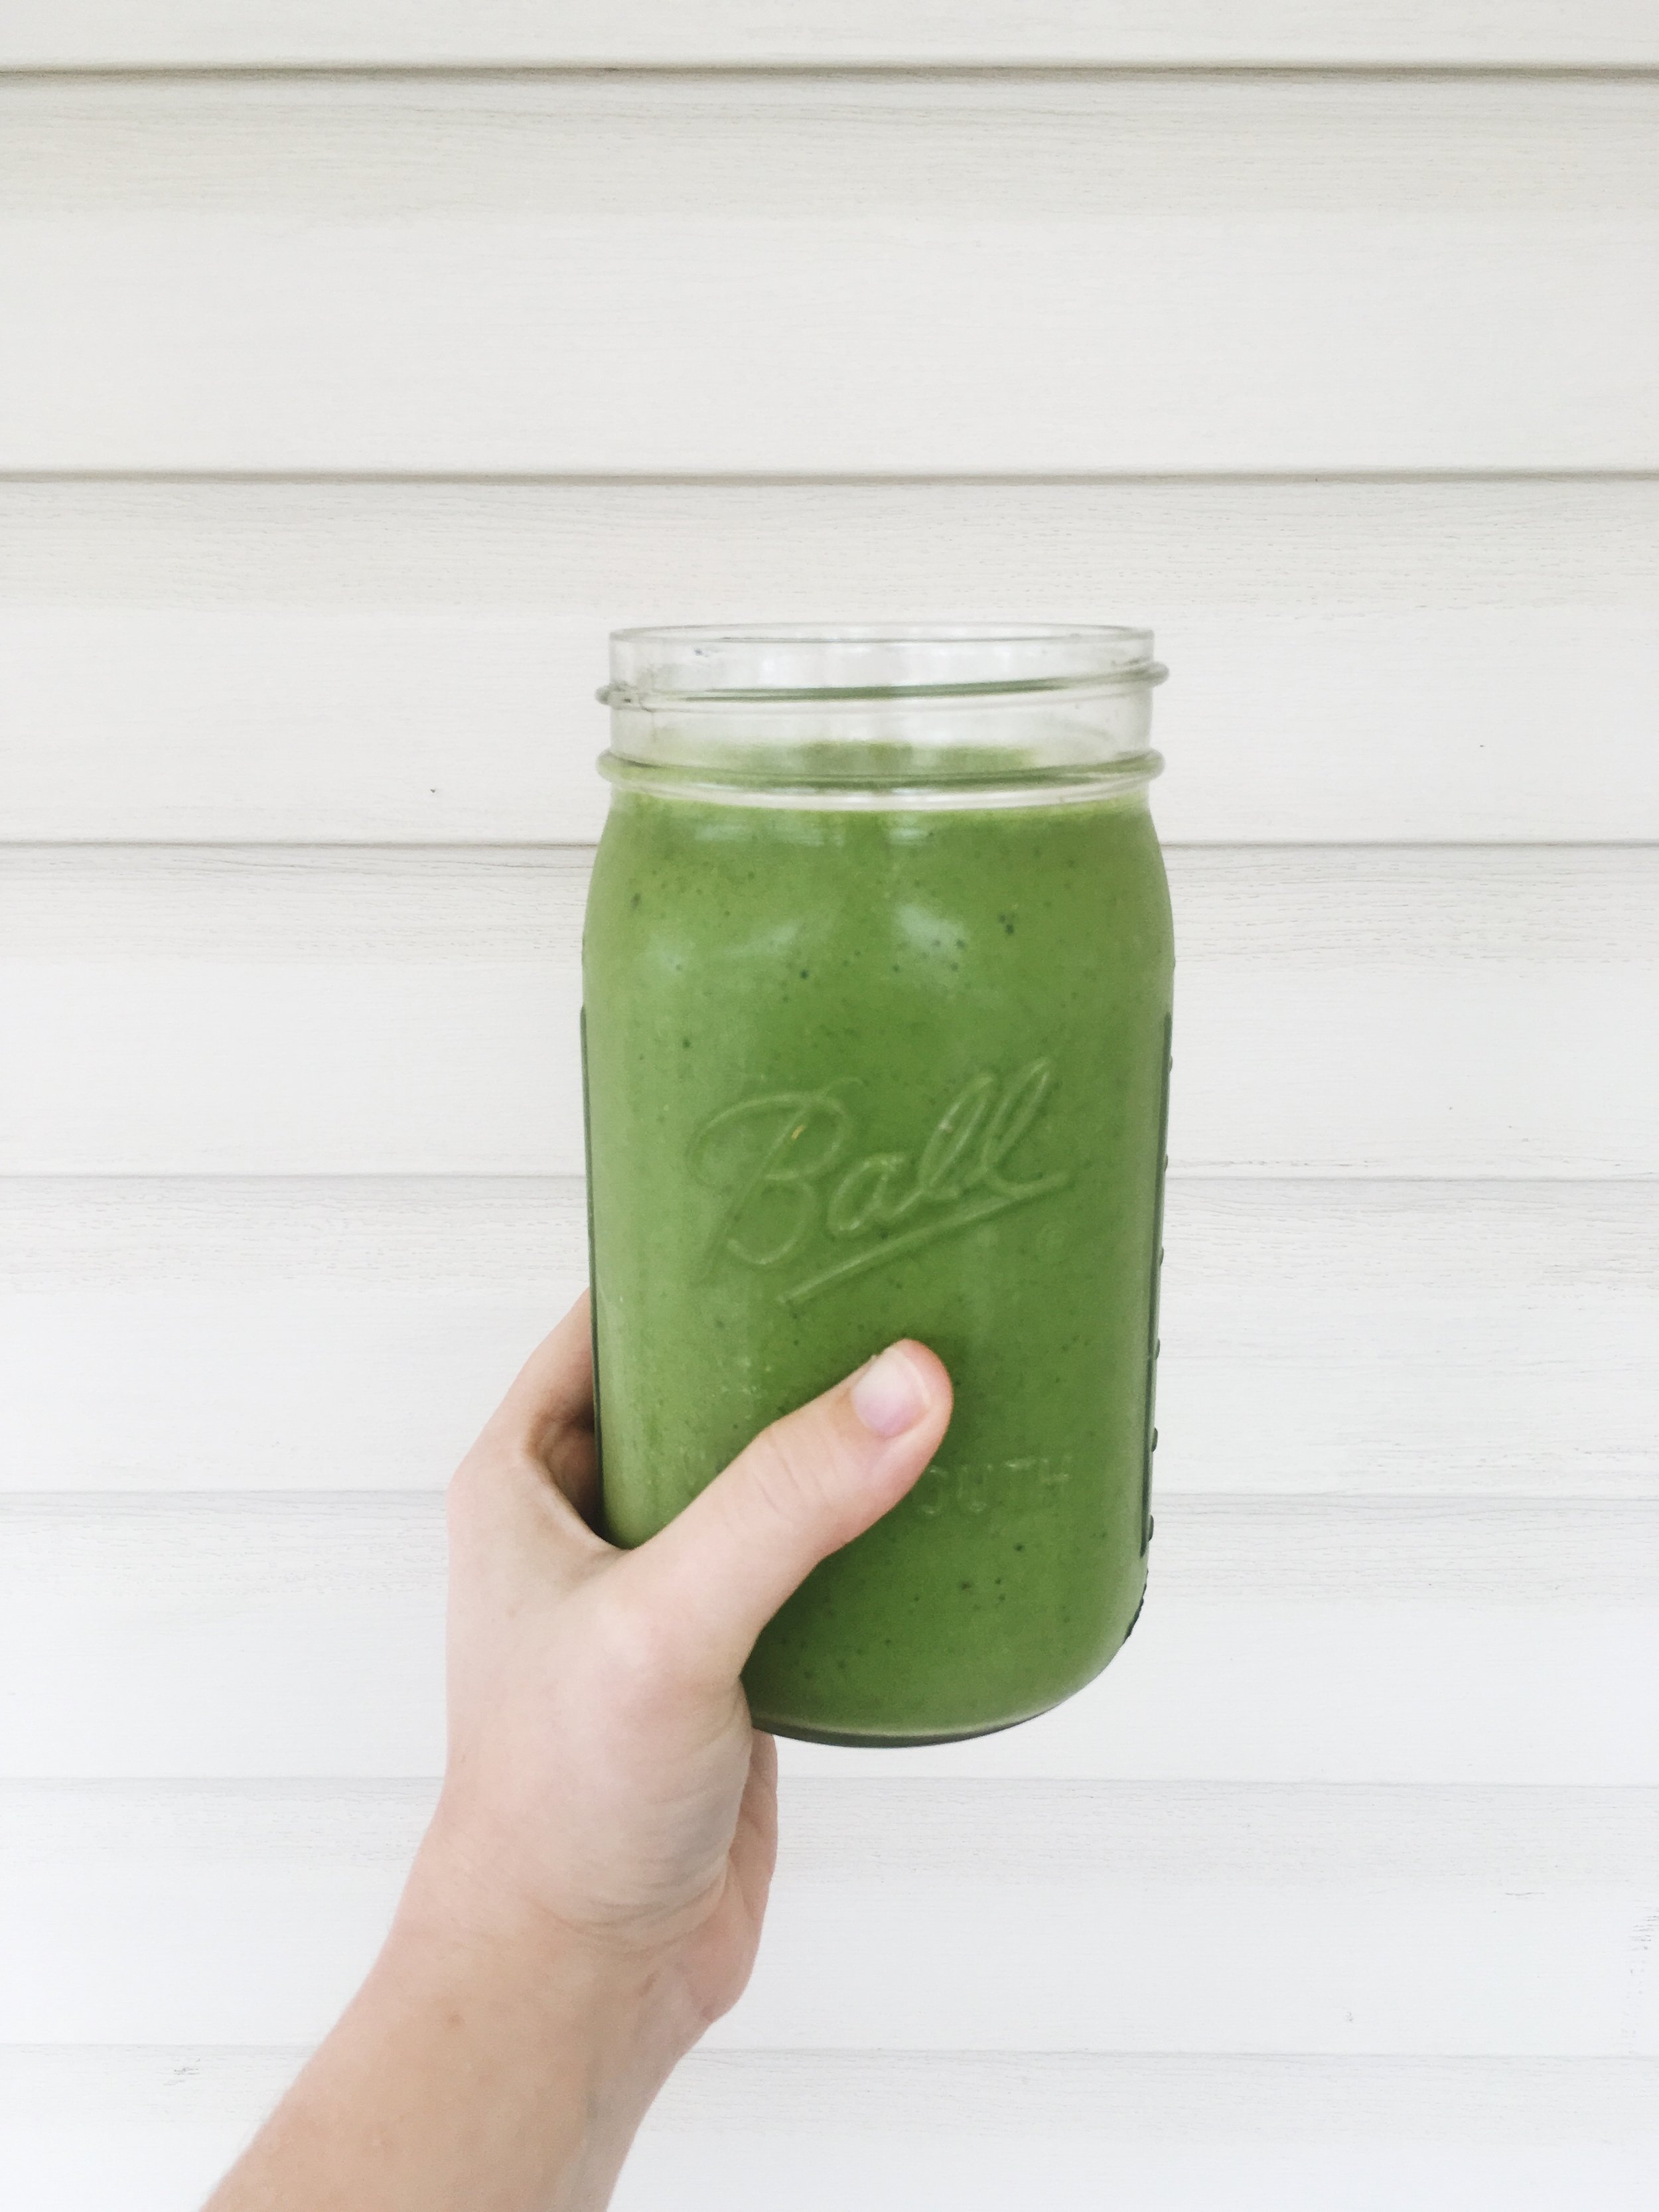 current workout playlist + green smoothie recipe 